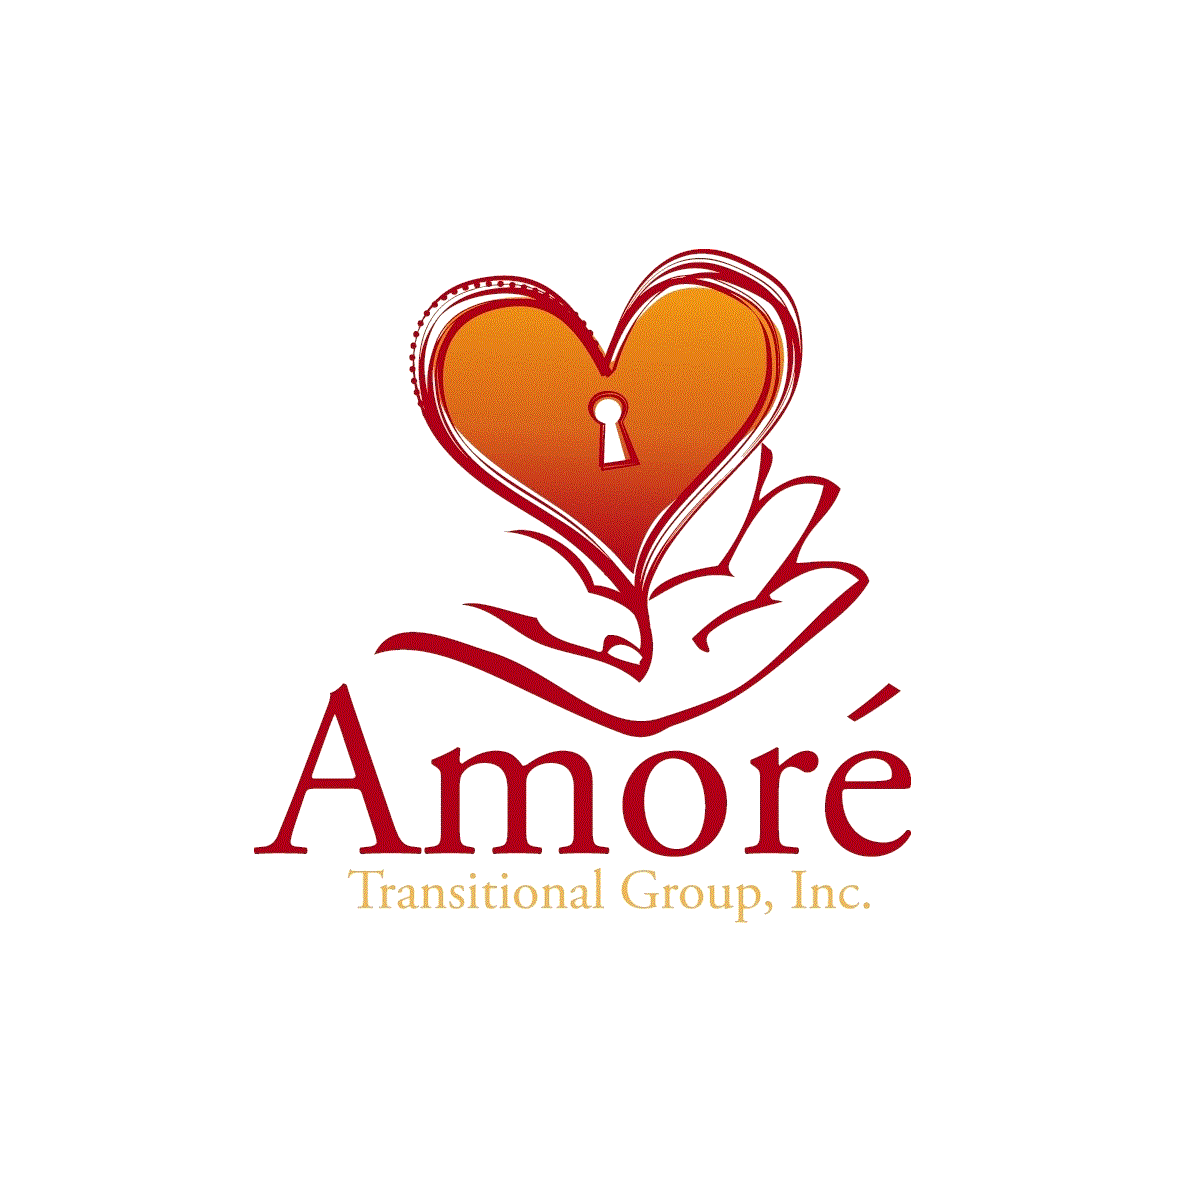 Amore Transitional Group